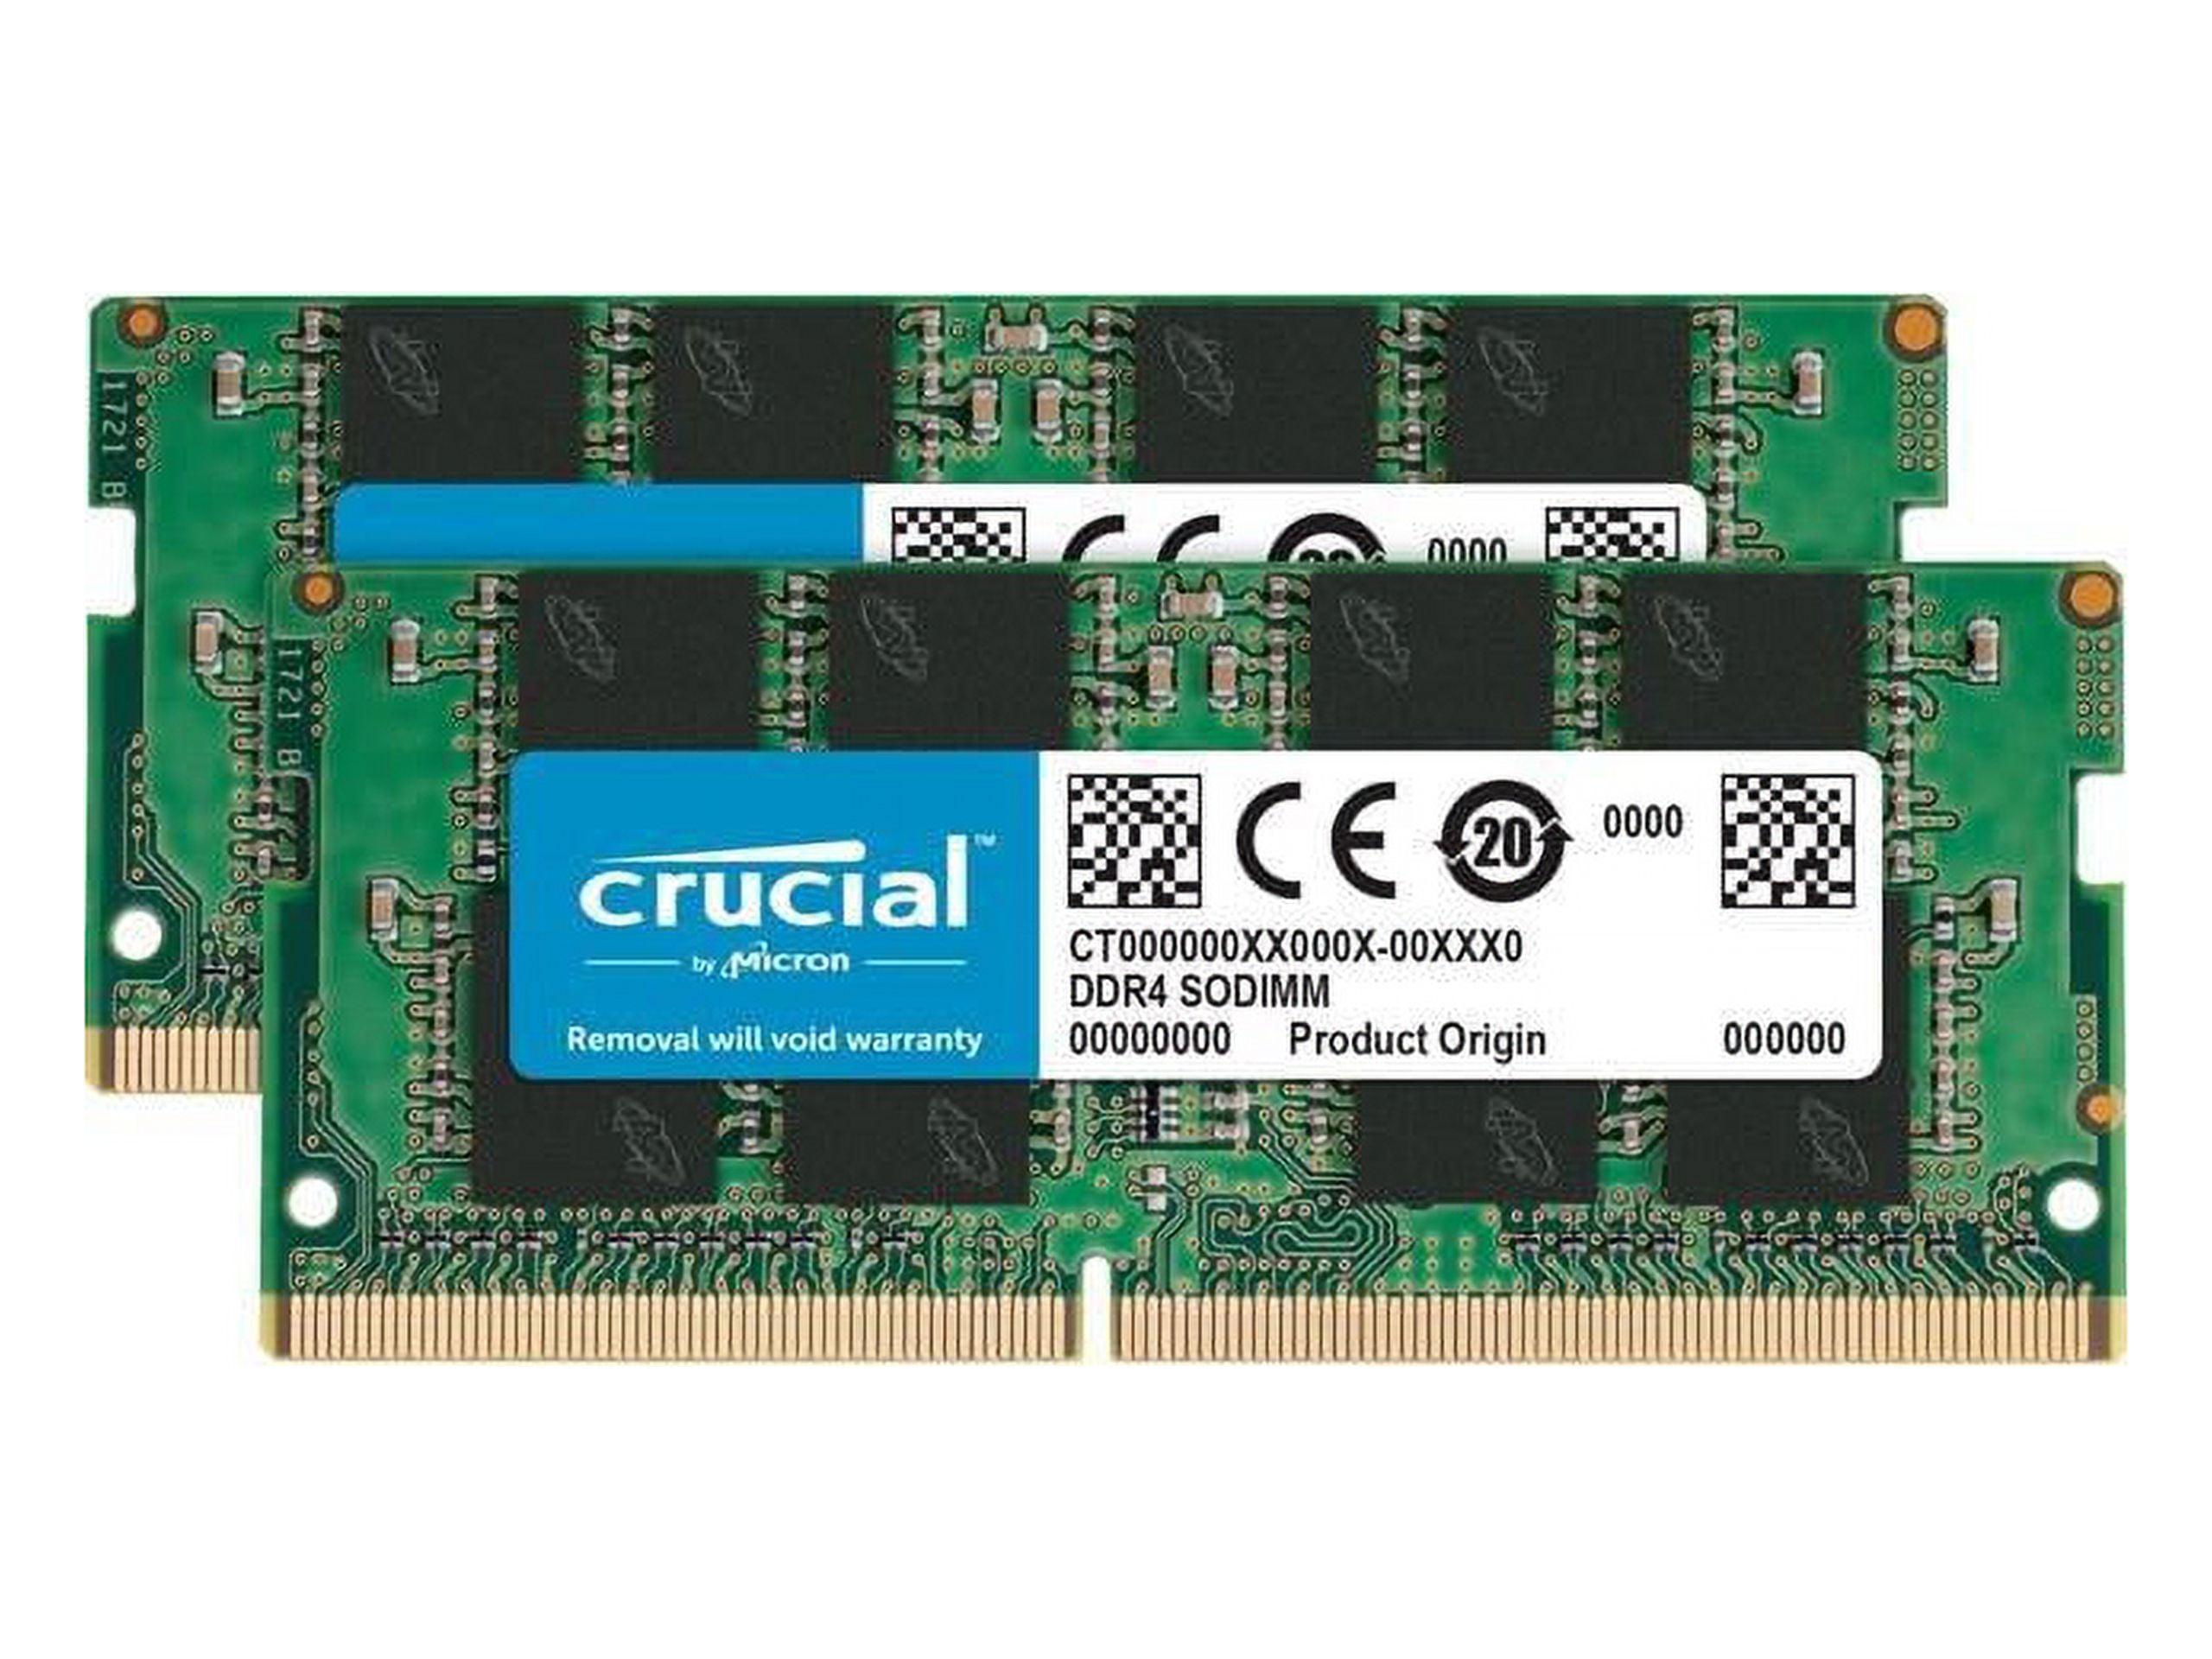 Crucial 8GB DDR4-2400 SODIMM Laptop - Perrieri Online e-store